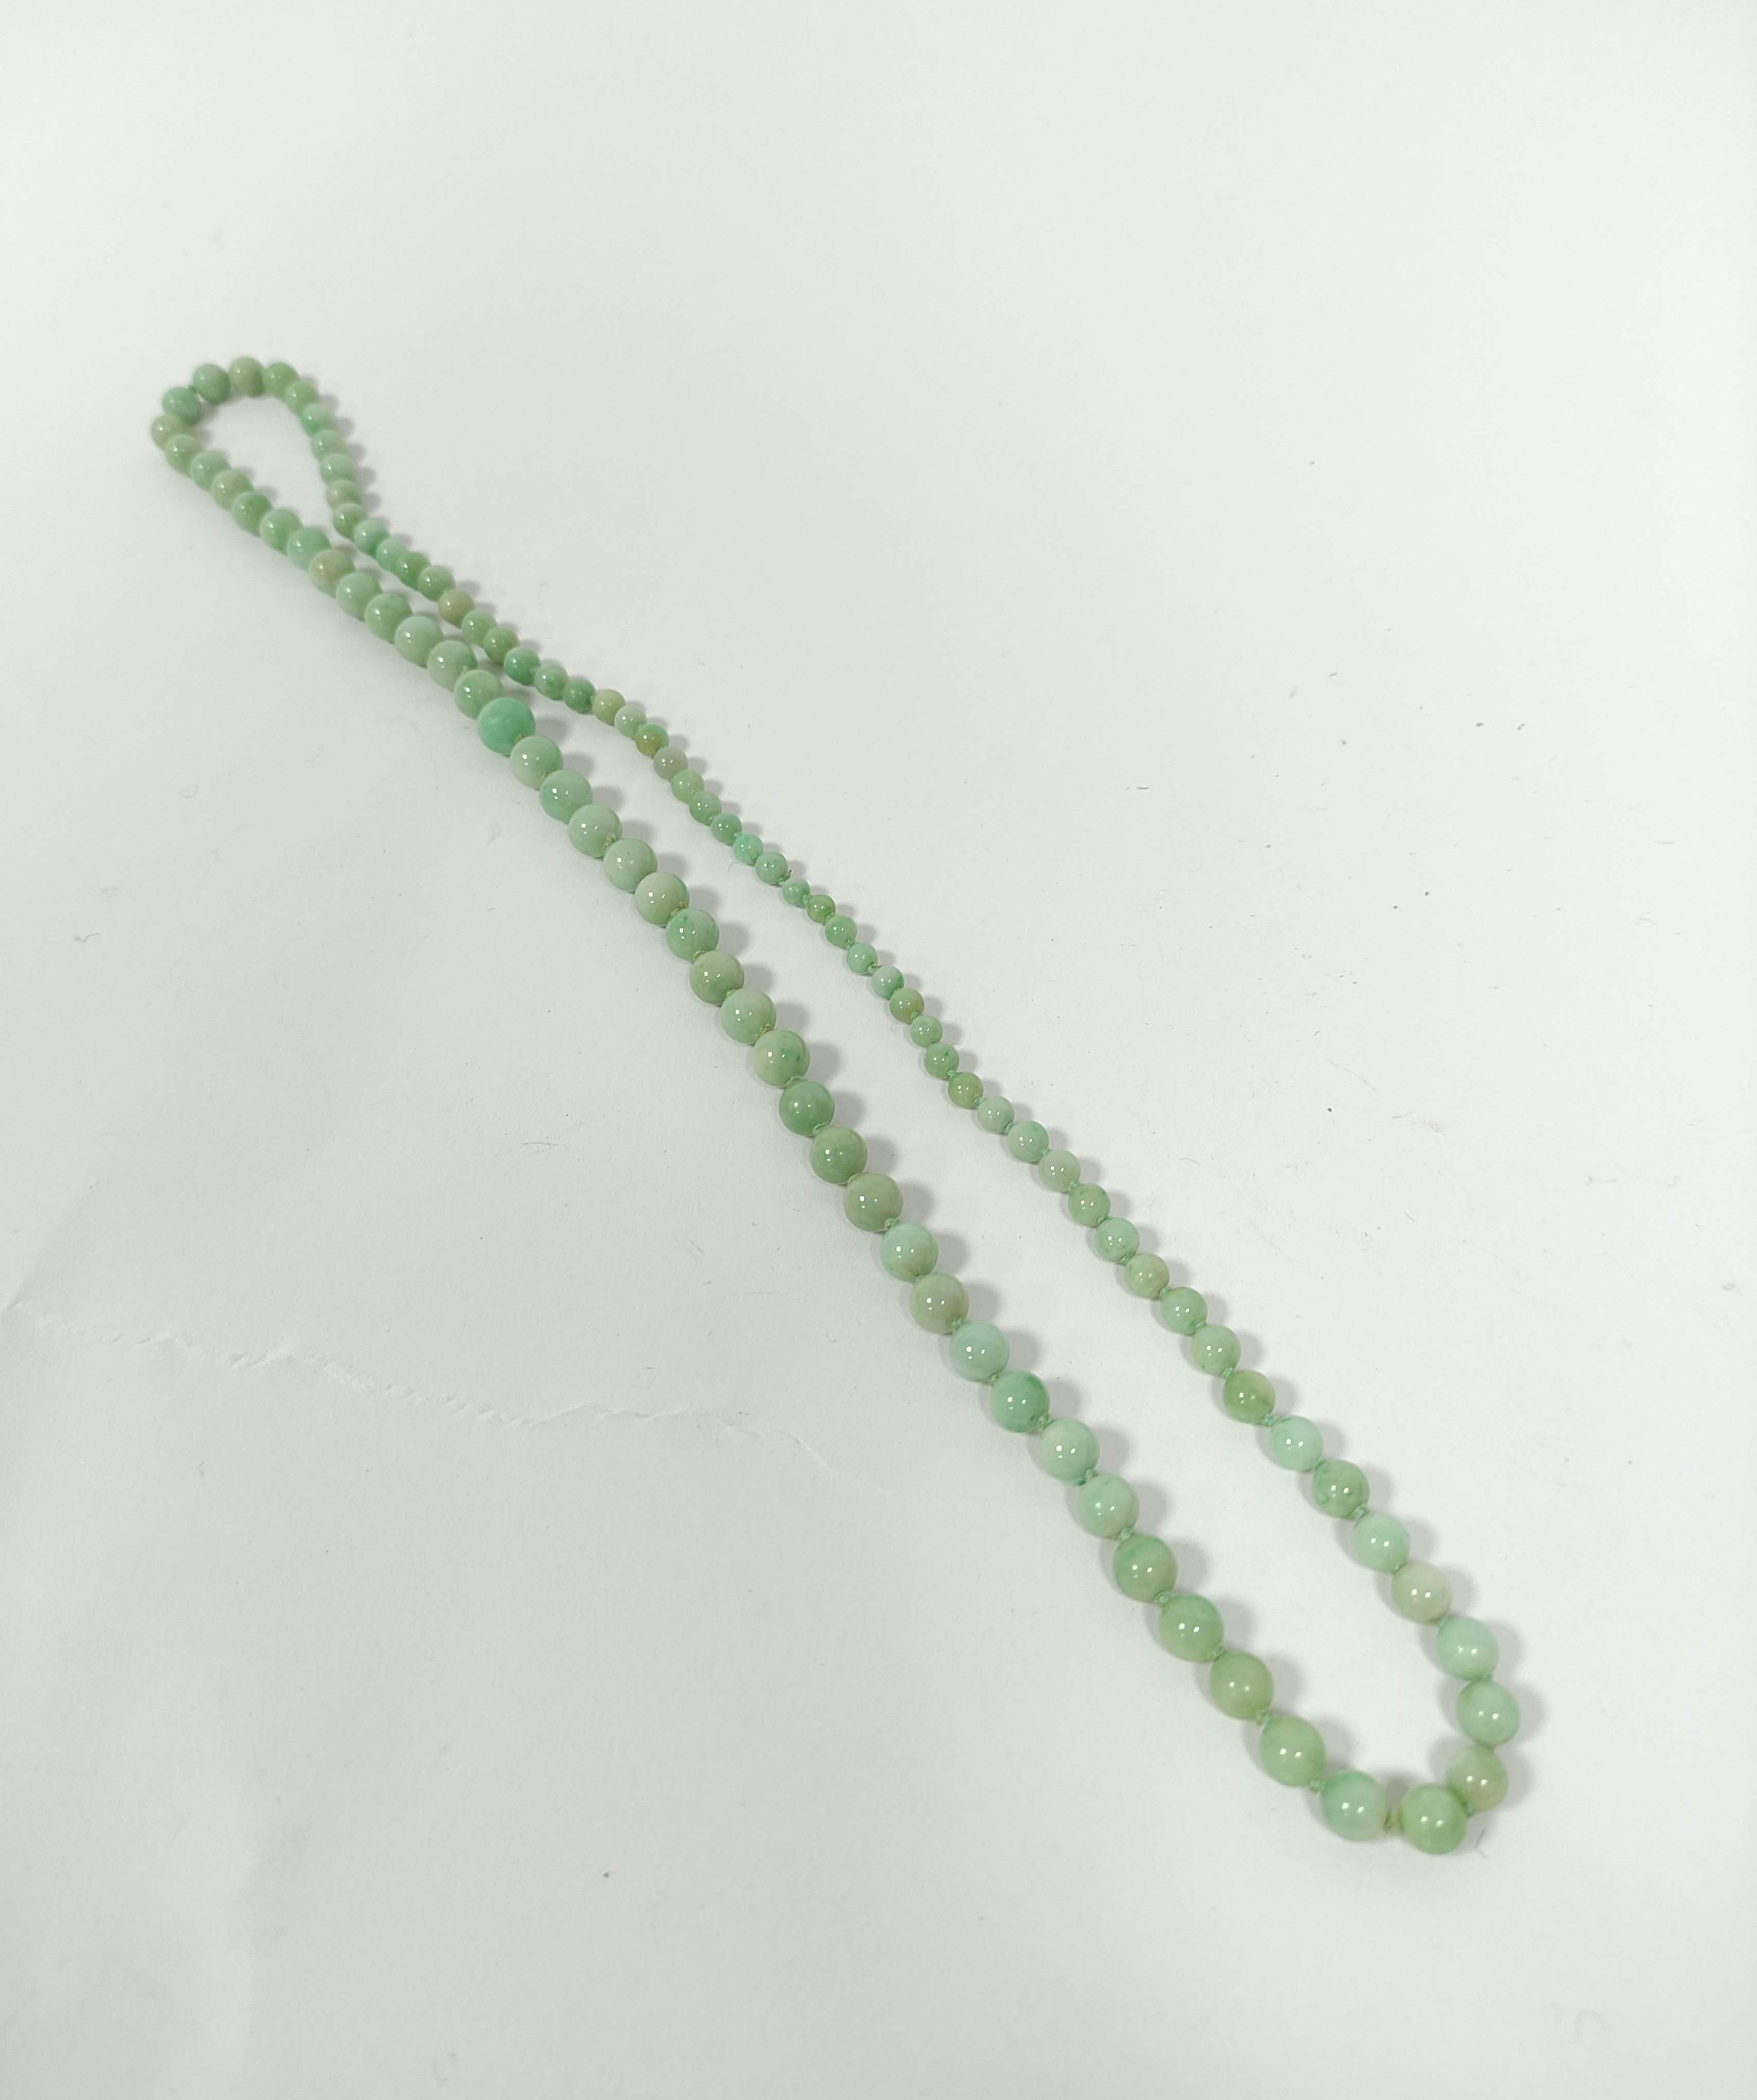 Jadeite bead necklace of graduated green beads, the largest 10mm.